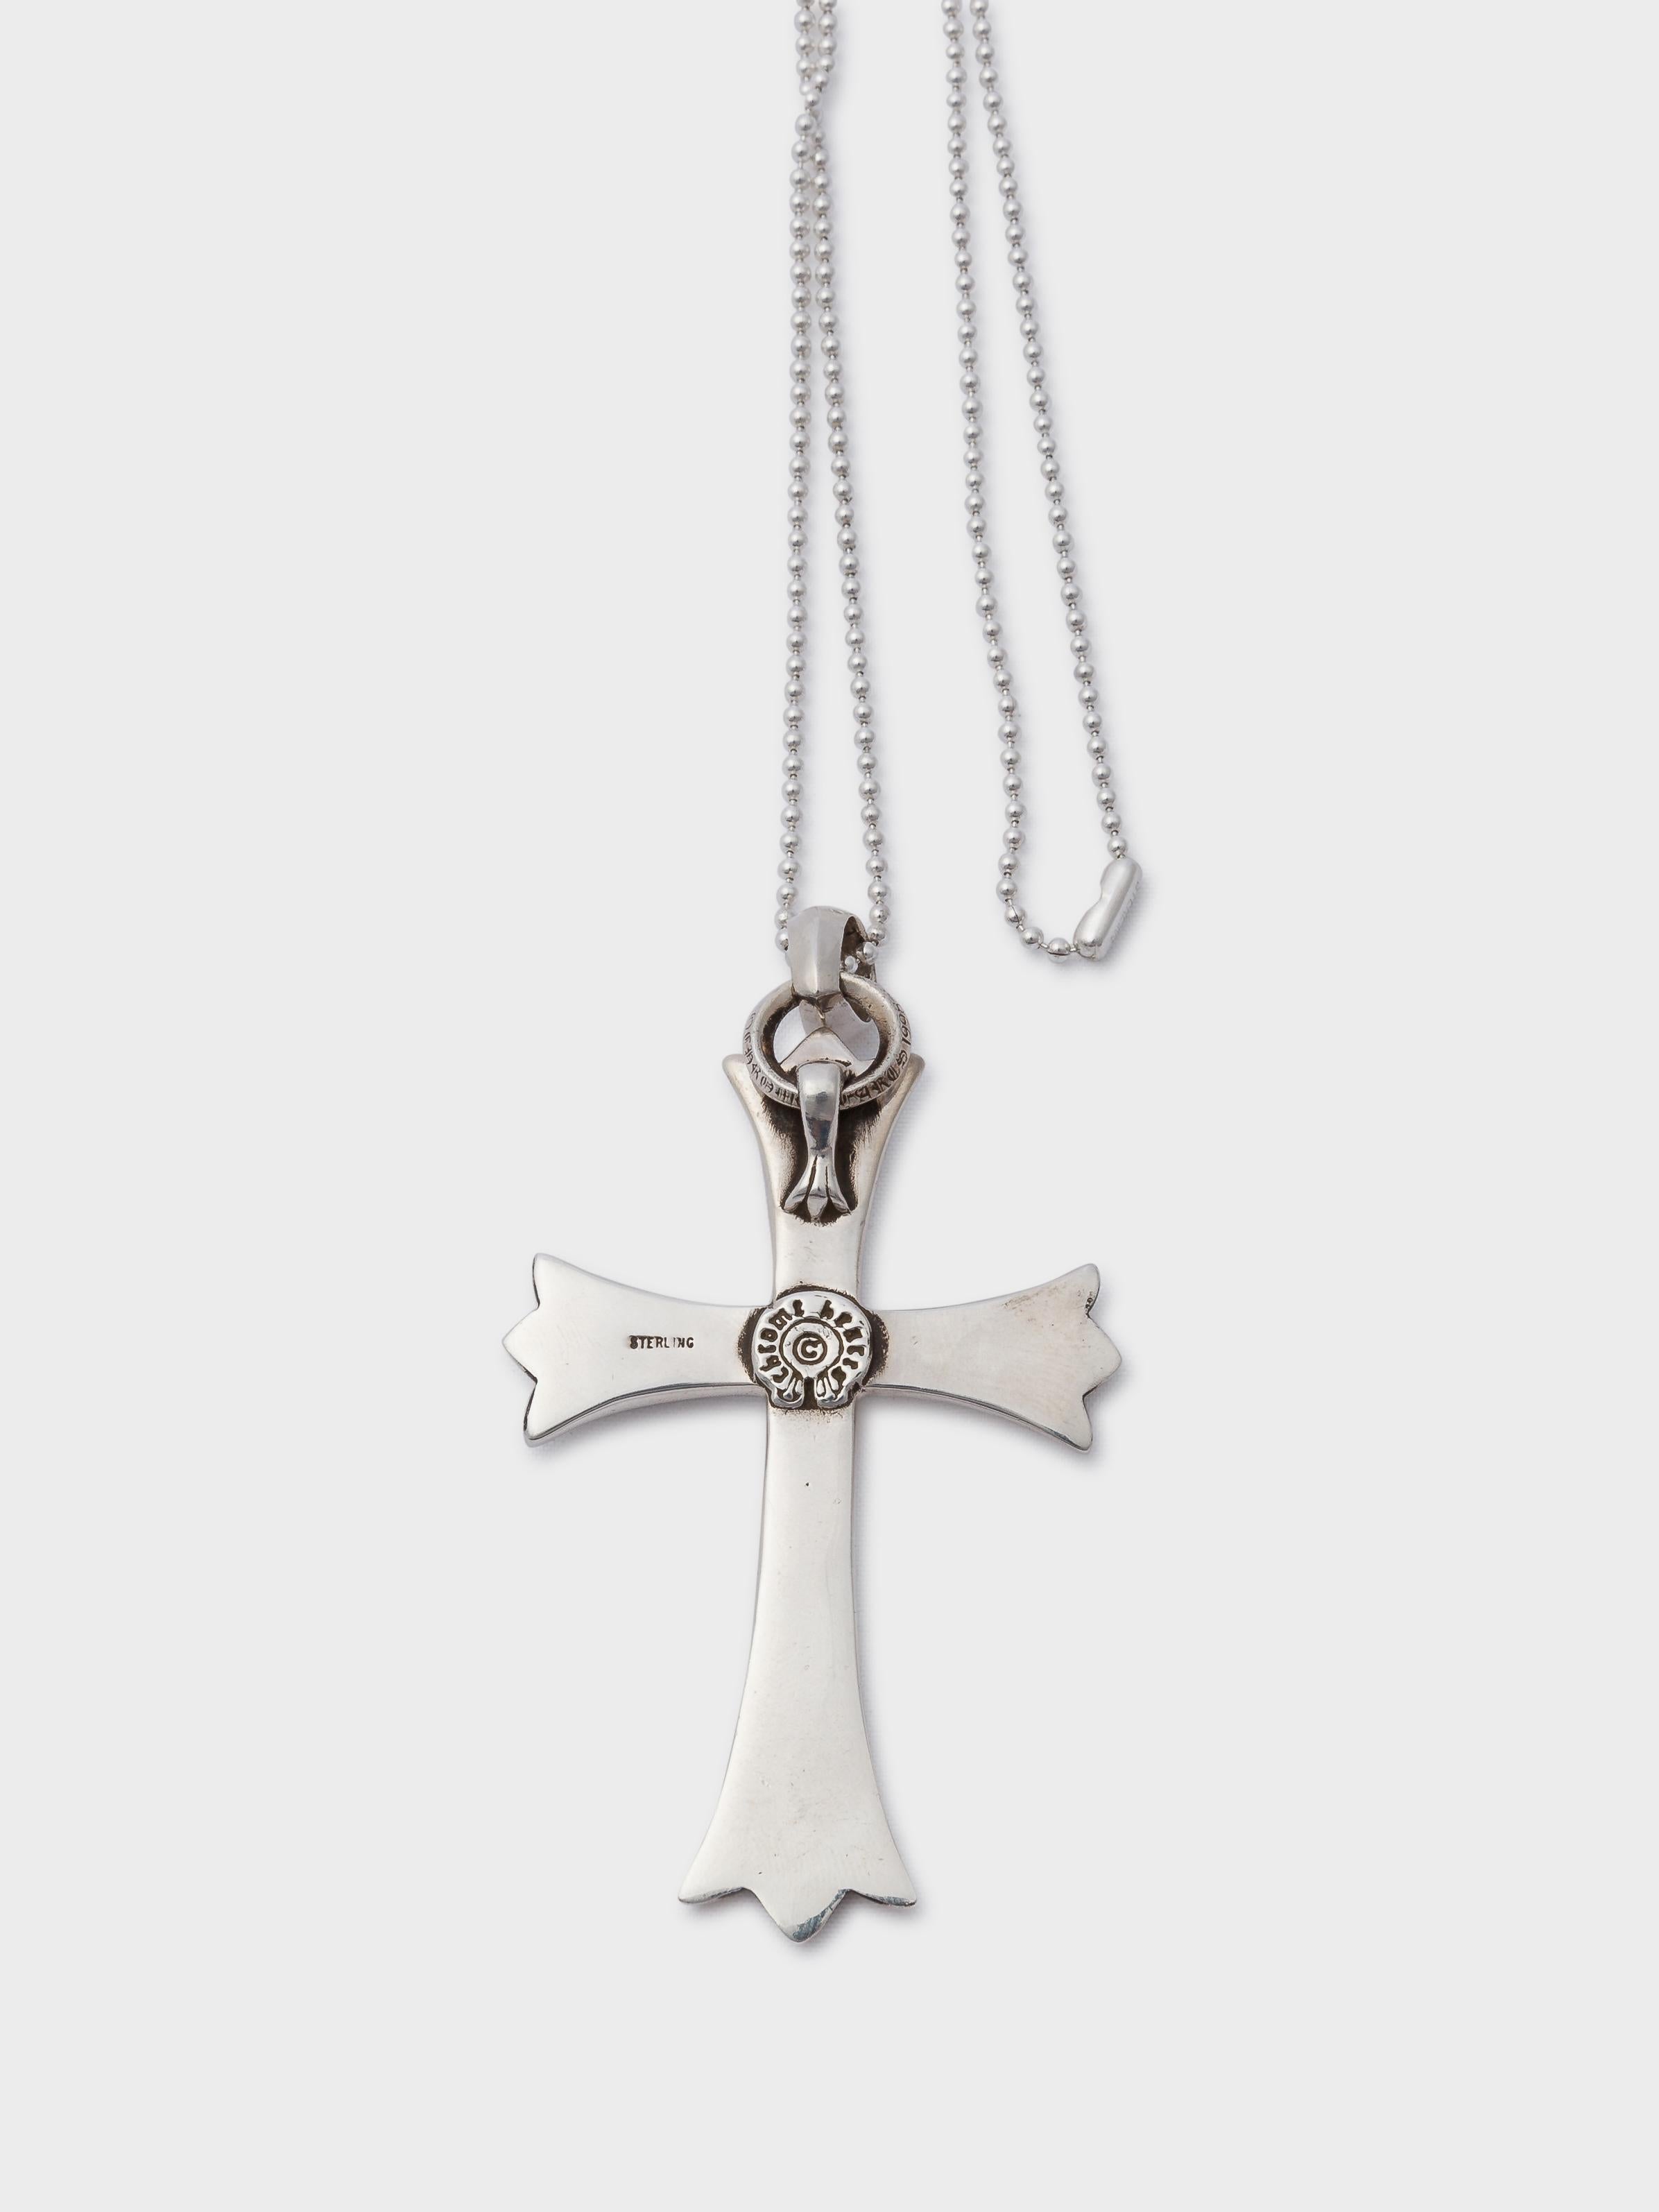 ✓ Authenticated

Our trained in-house authentication experts have reviewed this item to ensure that it is original. We guarantee its authenticity.

Here is a gently used Large Cross Necklace from Chrome Hearts.

Condition: Like new 

